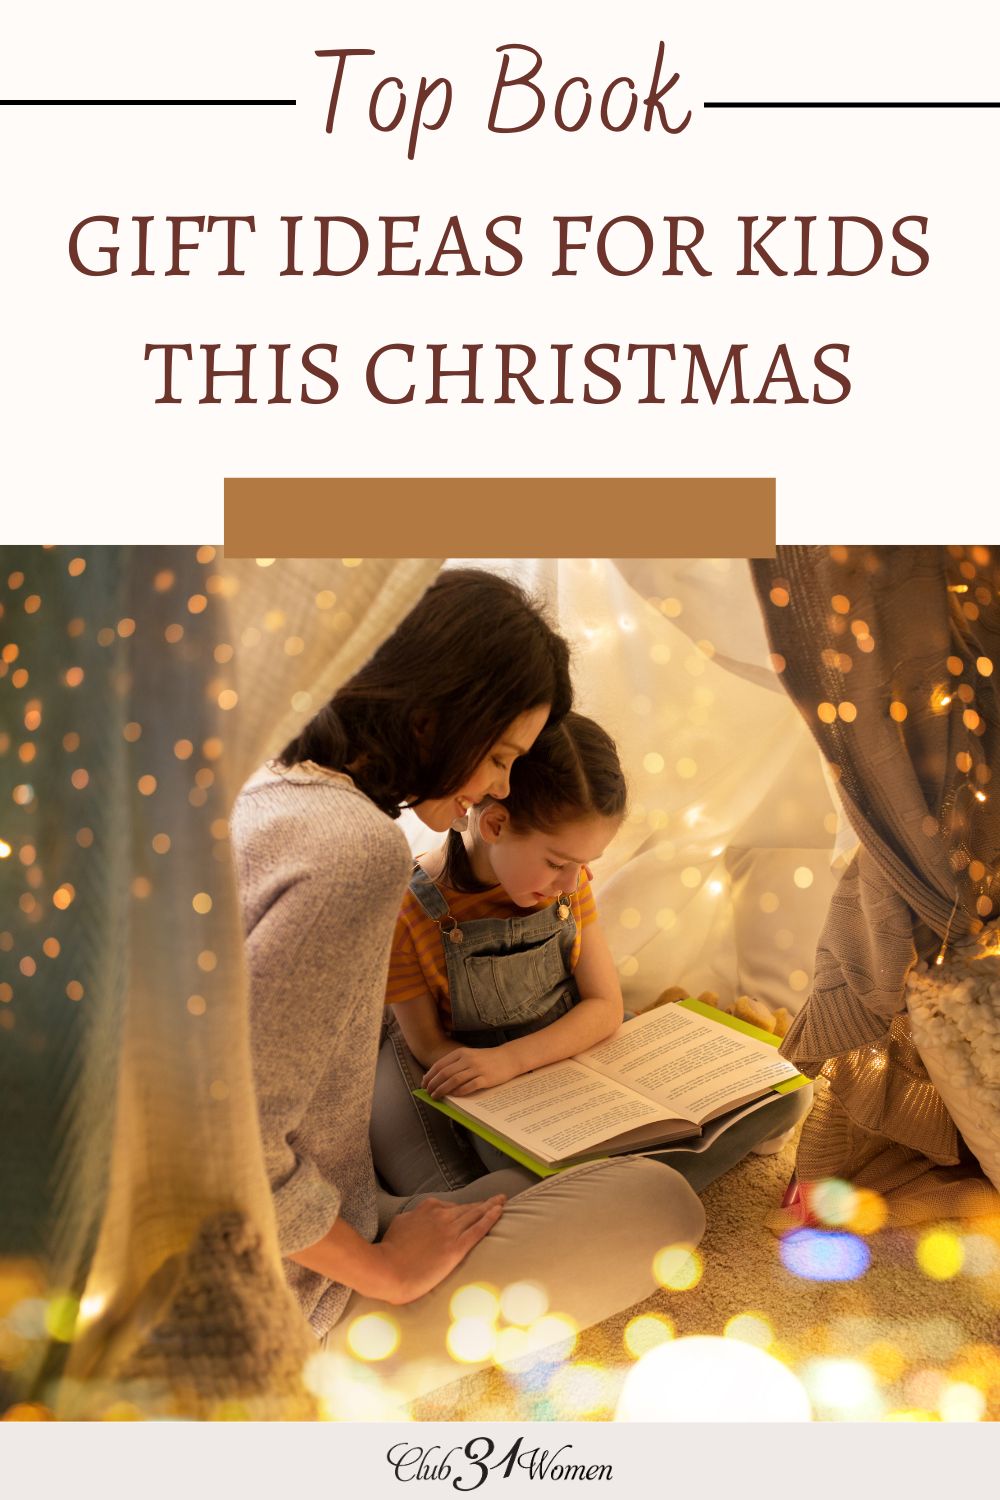 Books are one of the best gifts any child can receive! Here is a little list of some top book gift ideas for kids. via @Club31Women